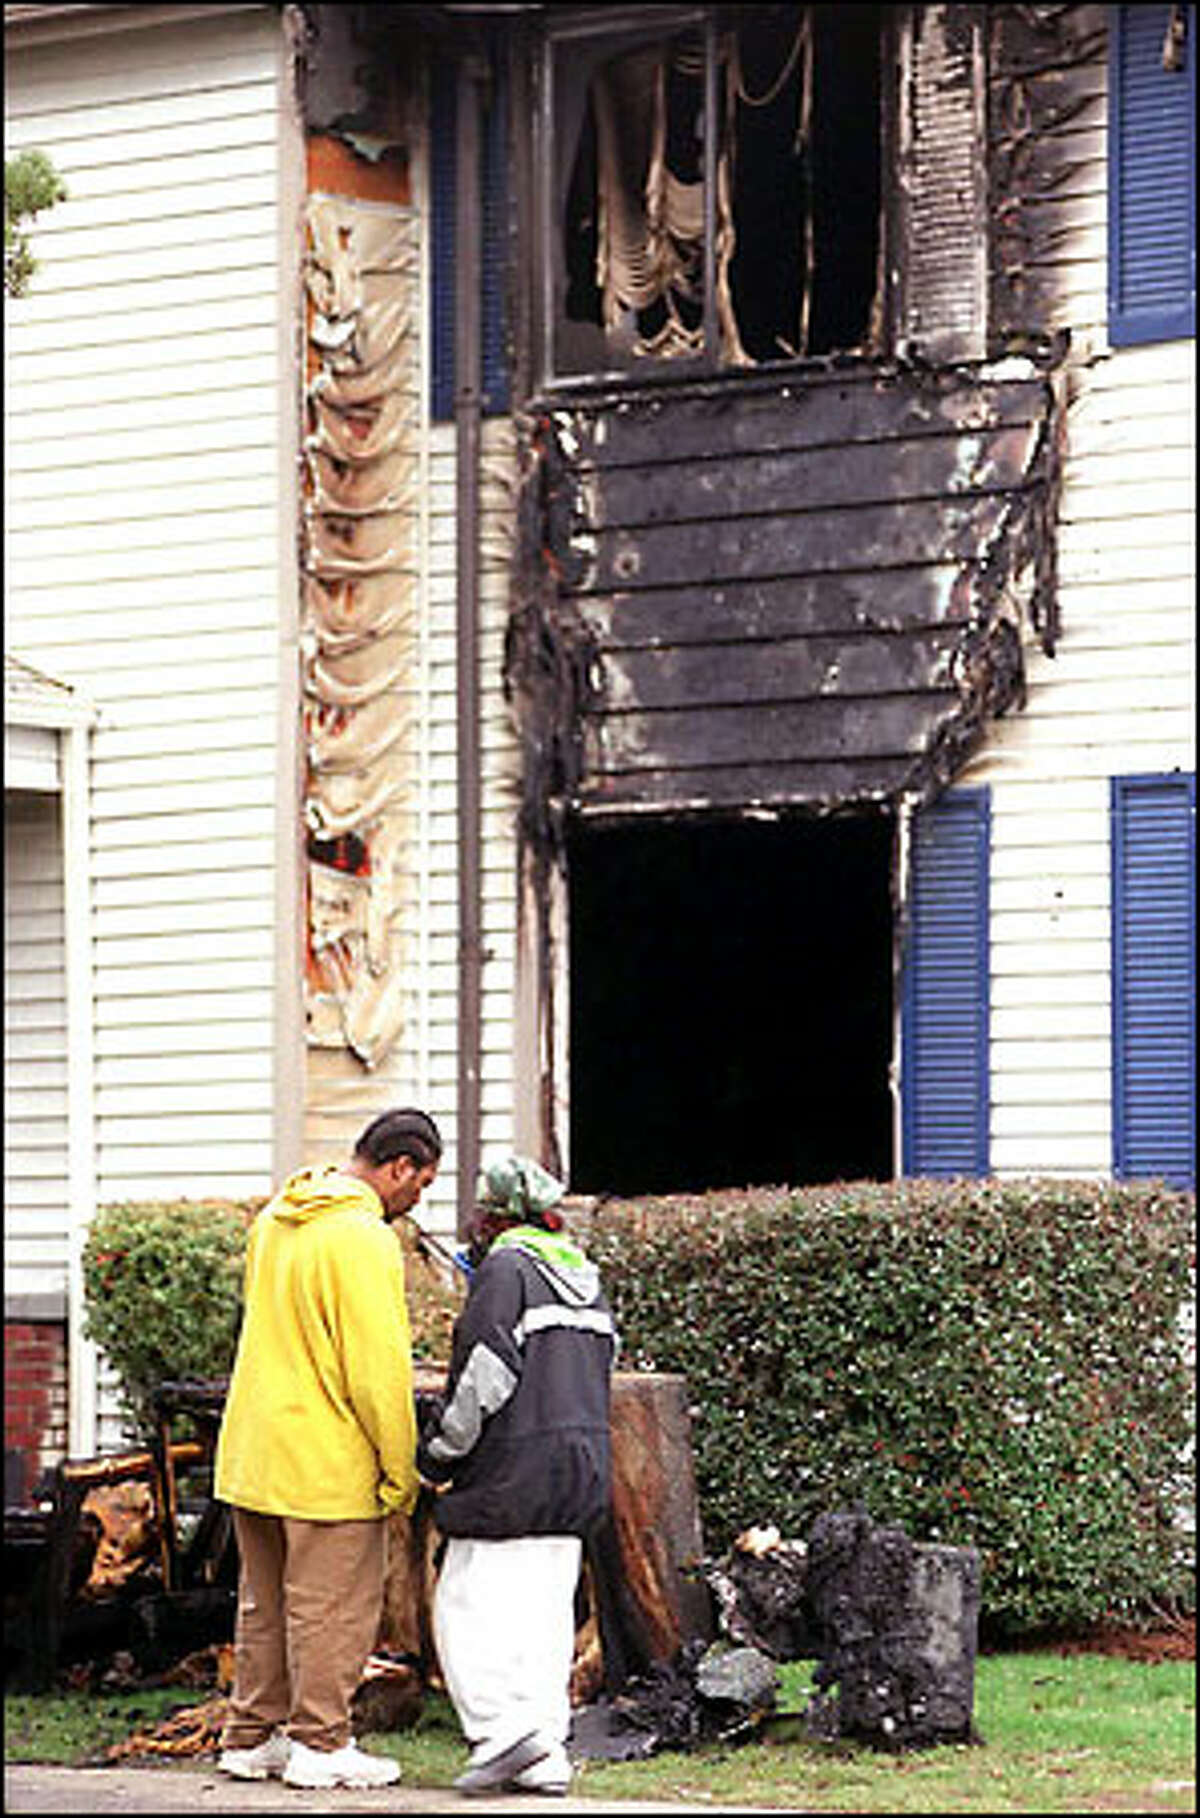 Residents of the Vintage Park apartments look over the aftermath of a fire in the Burien complex yesterday morning. More than 30 people were forced to evacuate, but housing was found for them. No injuries were reported.